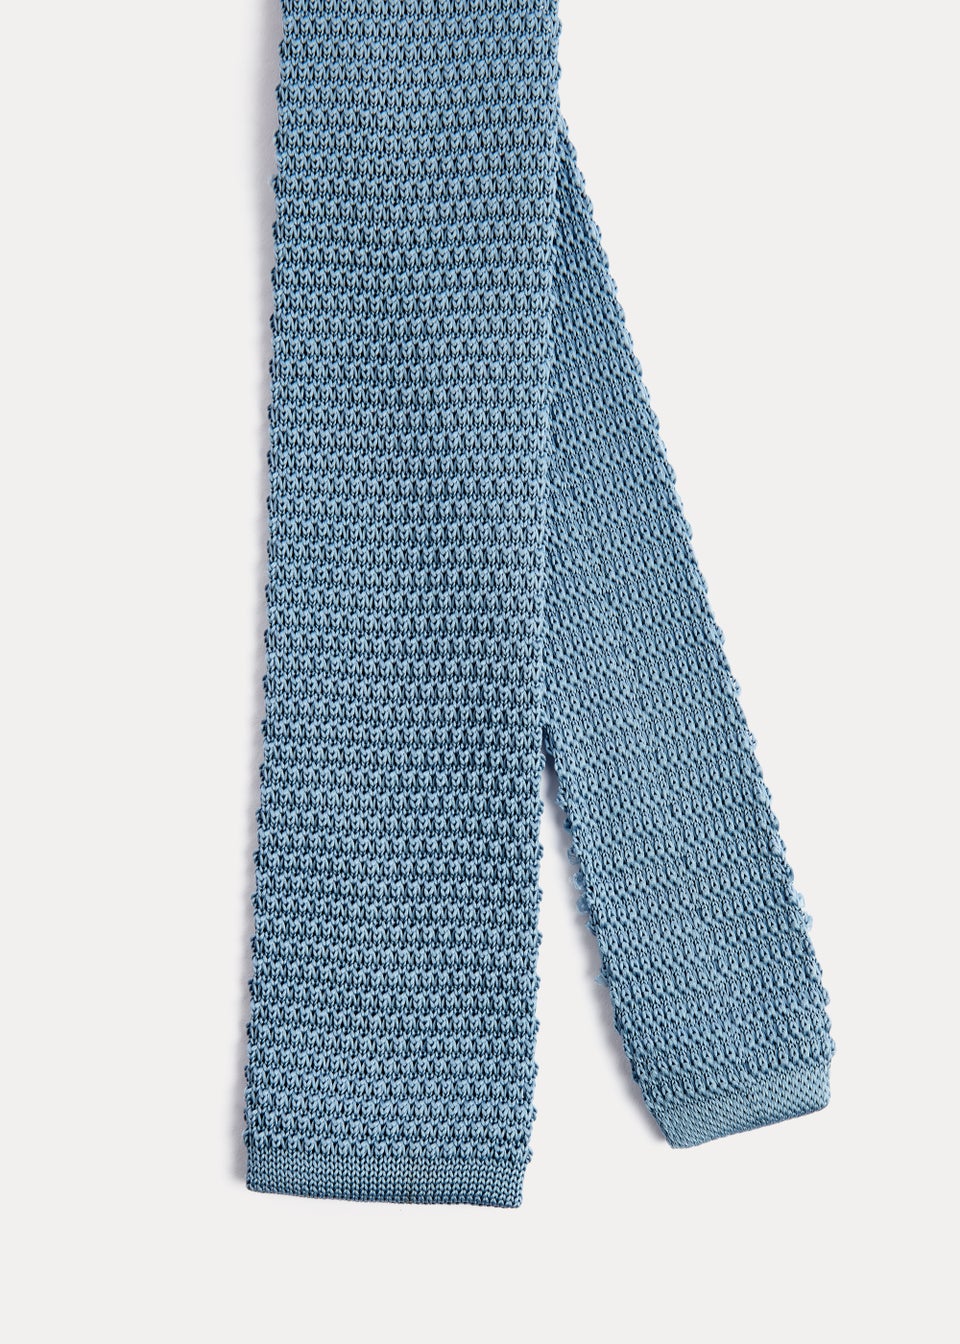 Taylor & Wright Blue Knitted Tie